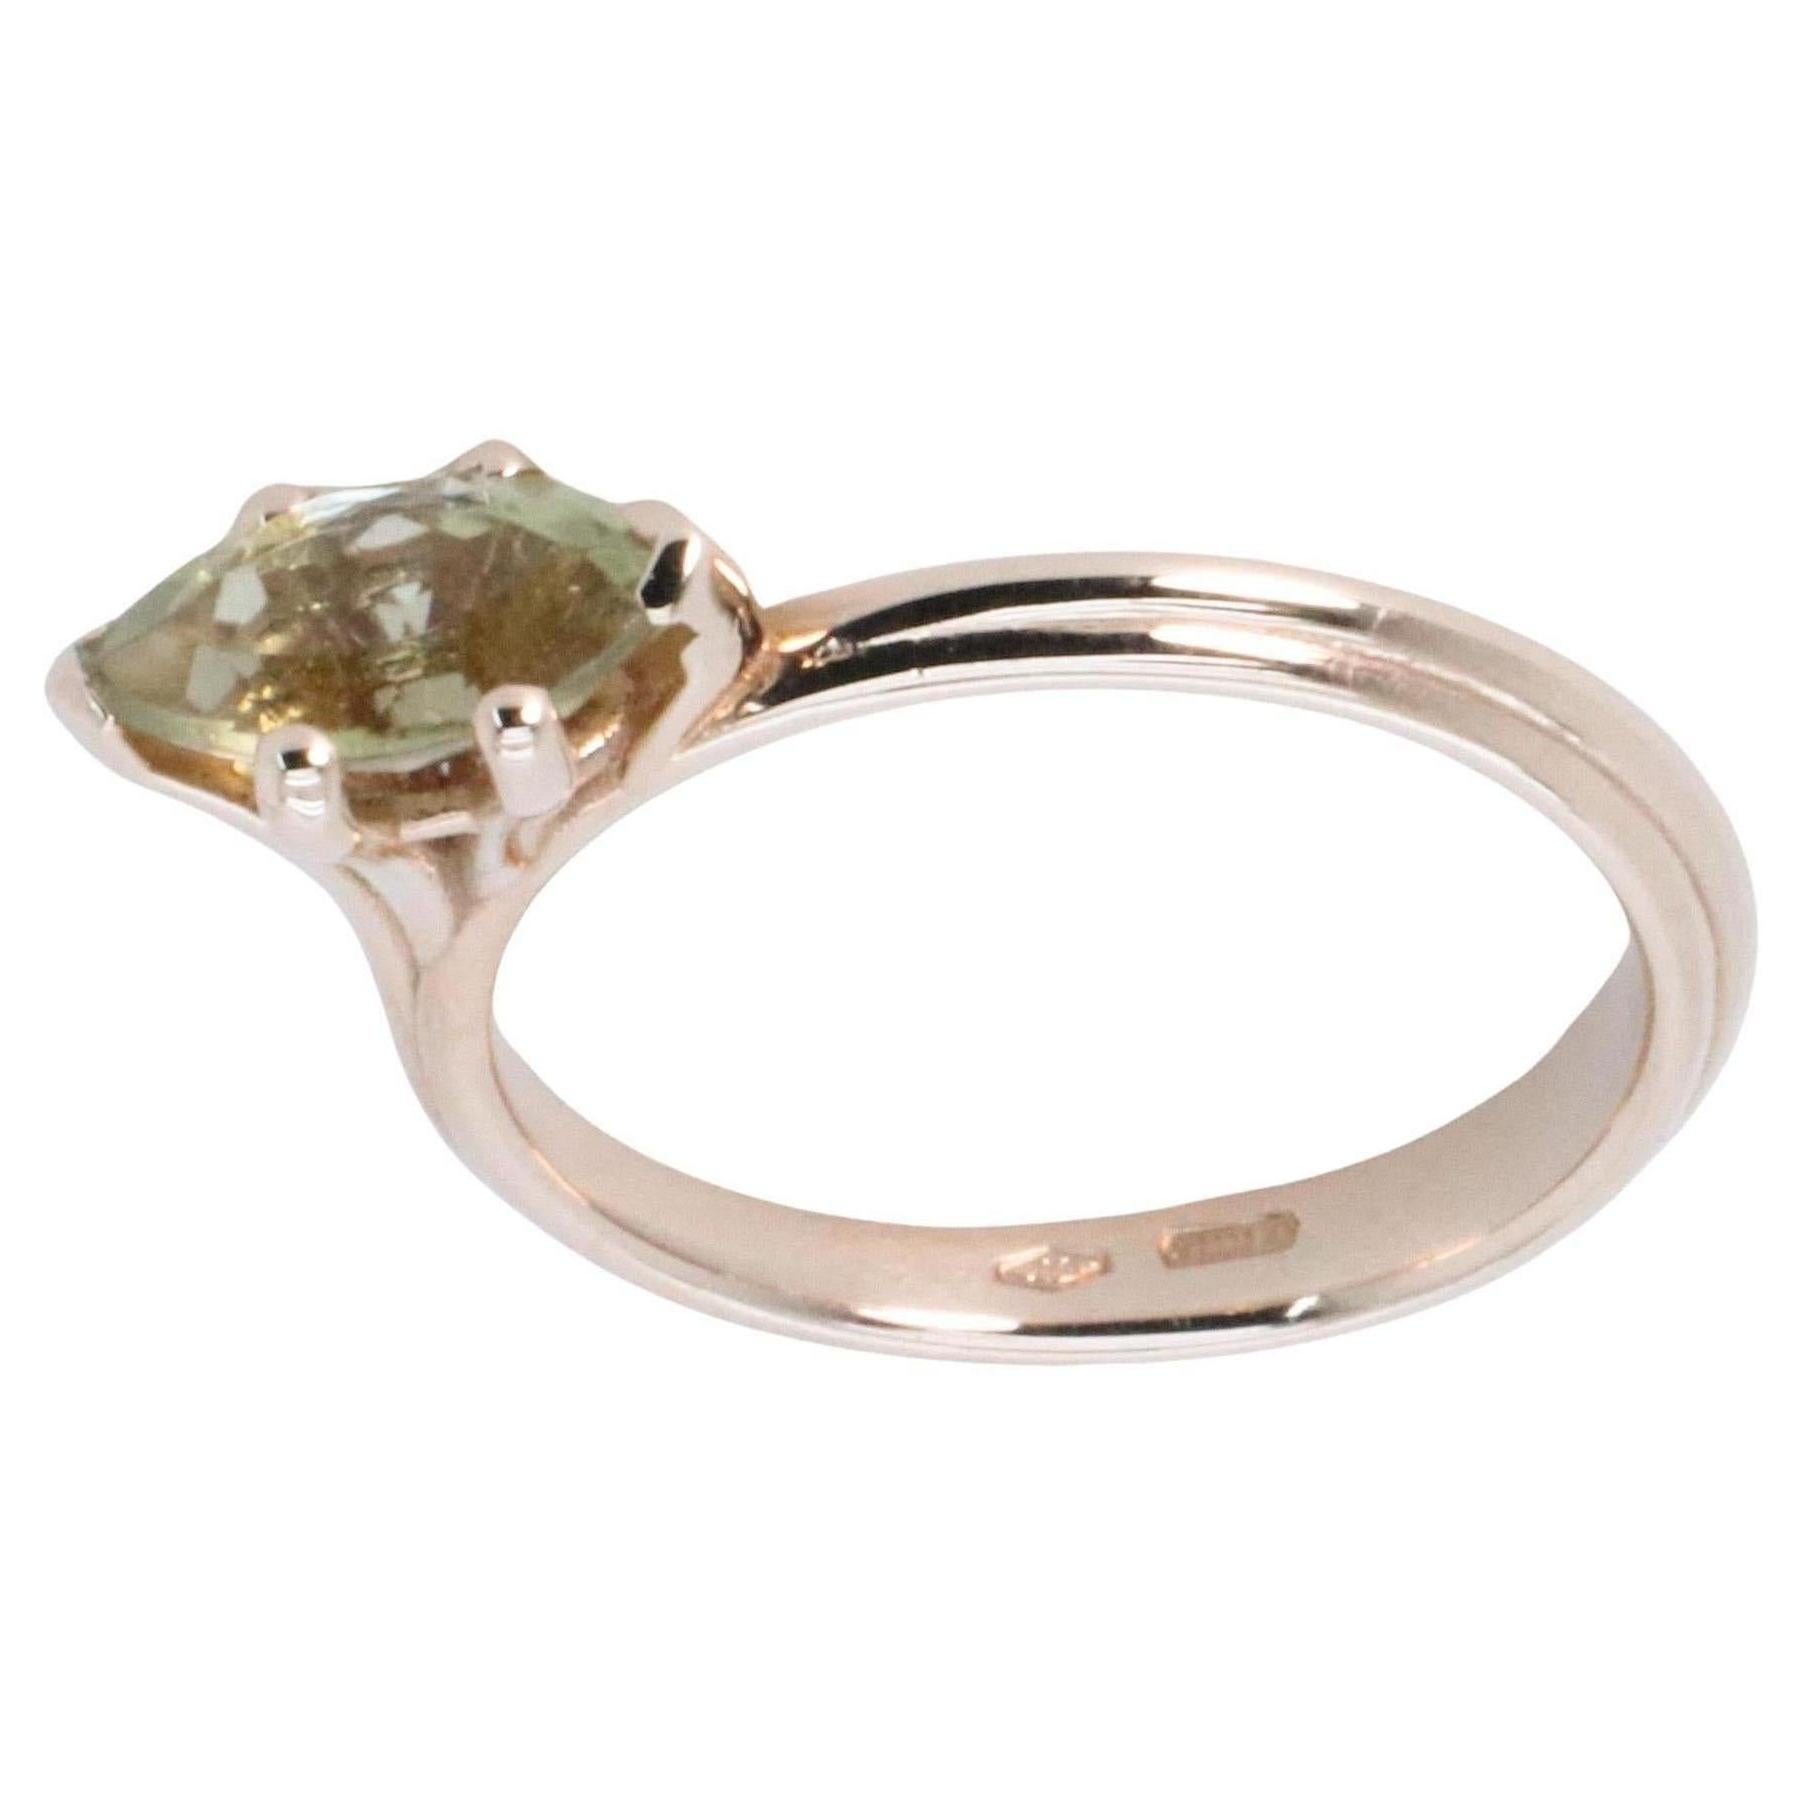 18K Rose Gold Asymmetric Cosmic Design Stackable Green Tormaline Cocktail Ring.
The Egle ring is made of 18 karat rose gold and features a marquise mixed cut natural light green tourmaline around 1.09 carats, which measures 4.7 mm by 11 mm by 3.7